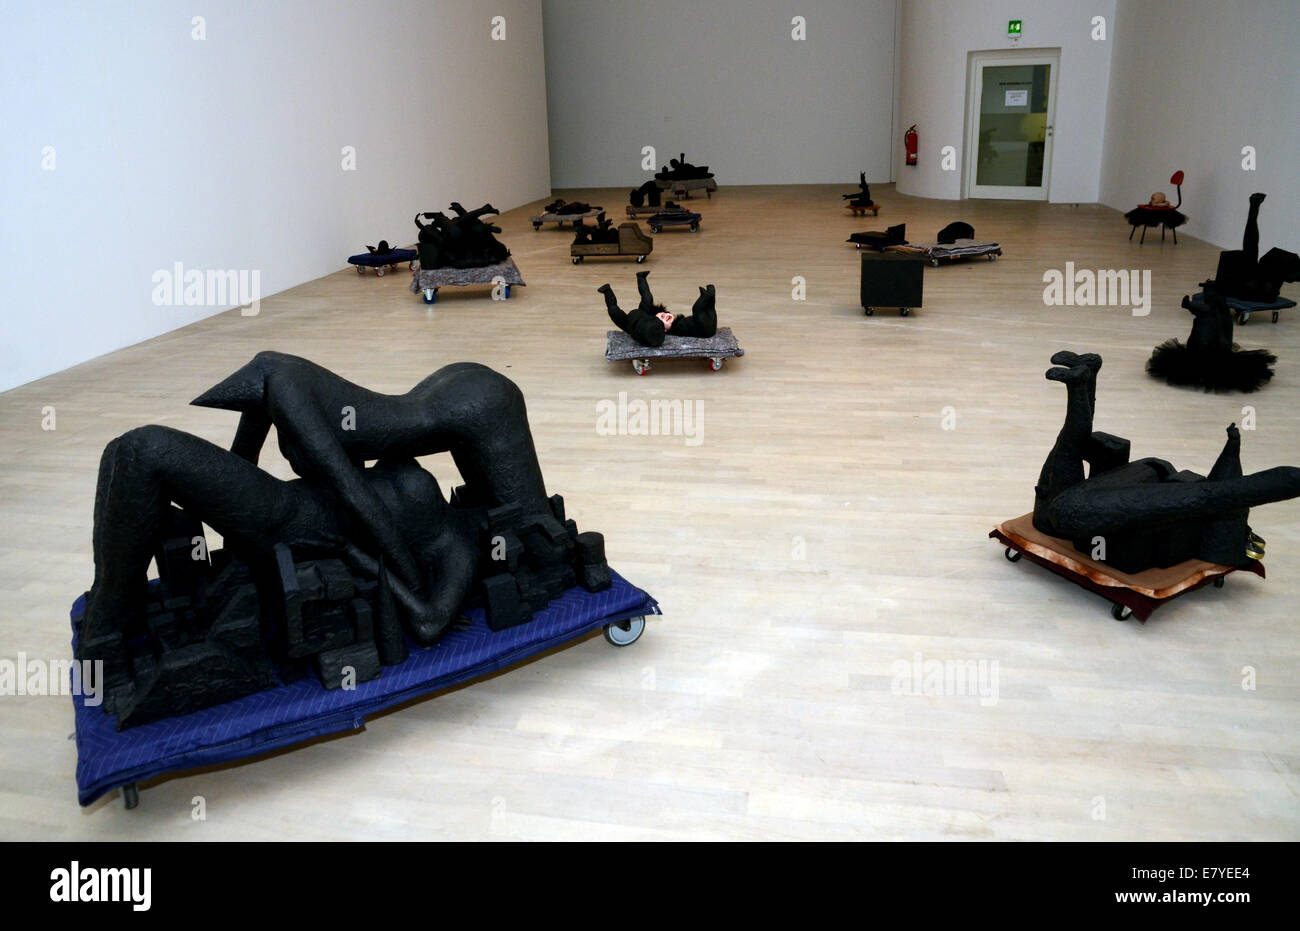 Duesseldorf, Germany. 26th Sep, 2014. The installation 'Mes Transports' by French painter and installation artist Annette Messager is seen during the preview of the exhibition 'Exhibition/Exposition' at K21 Staendehaus museum in Duesseldorf, Germany, 26 September 2014. The exhibition will run from 29 September 2014 until 22 March 2015. Photo: Horst Ossinger/dpa/Alamy Live News Stock Photo